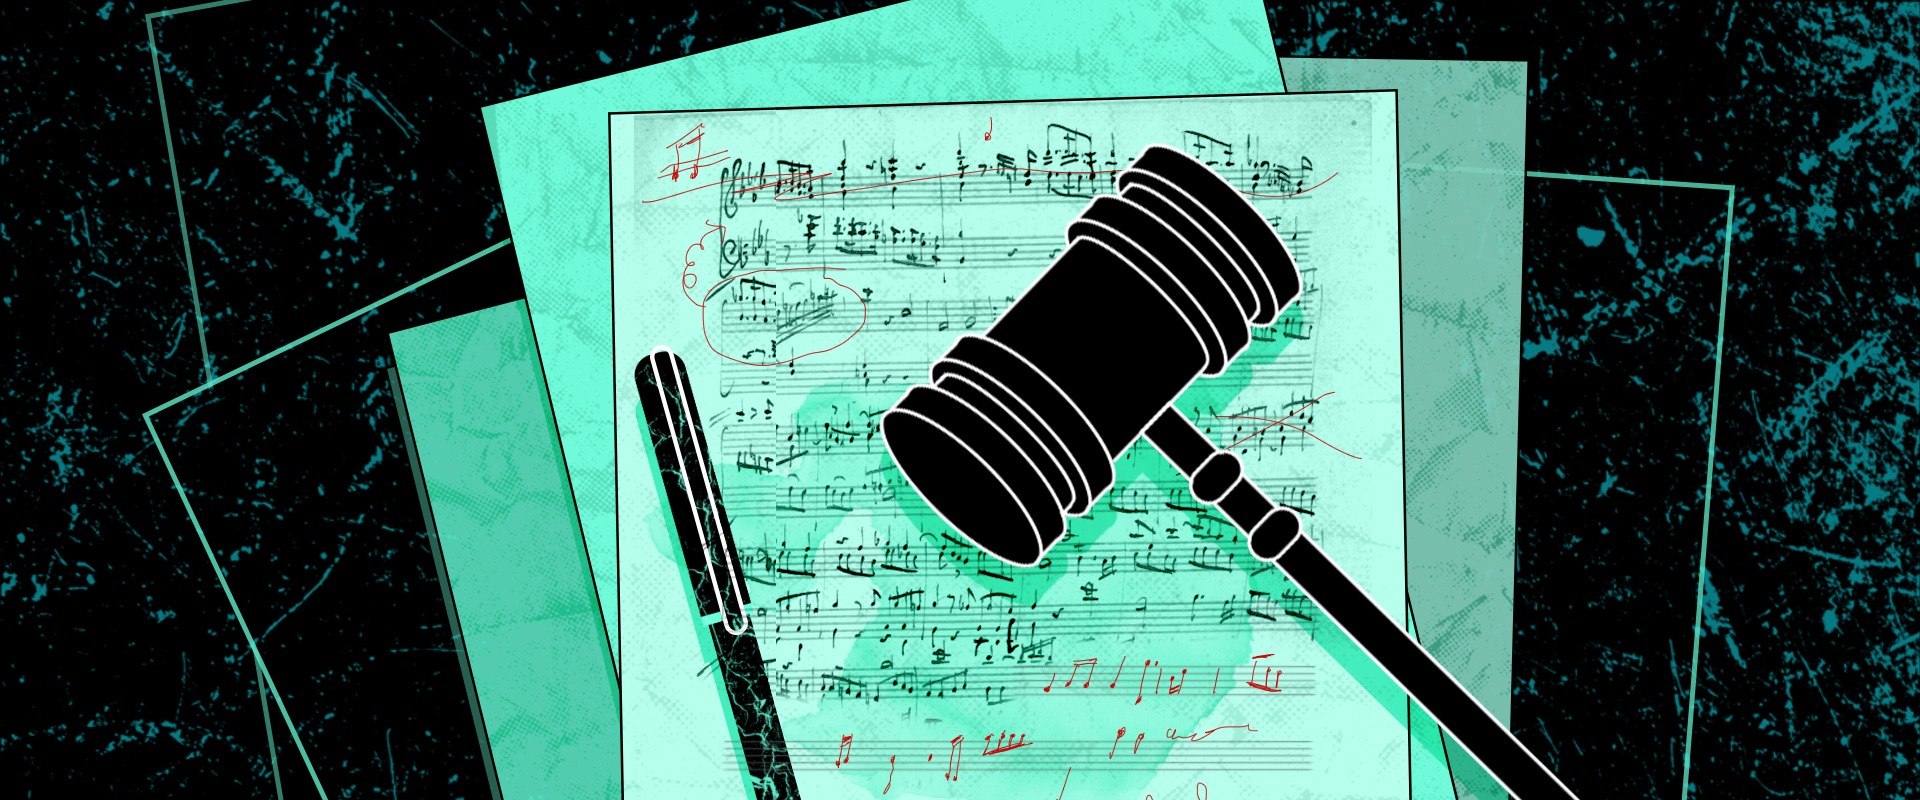 What makes a song plagiarized?